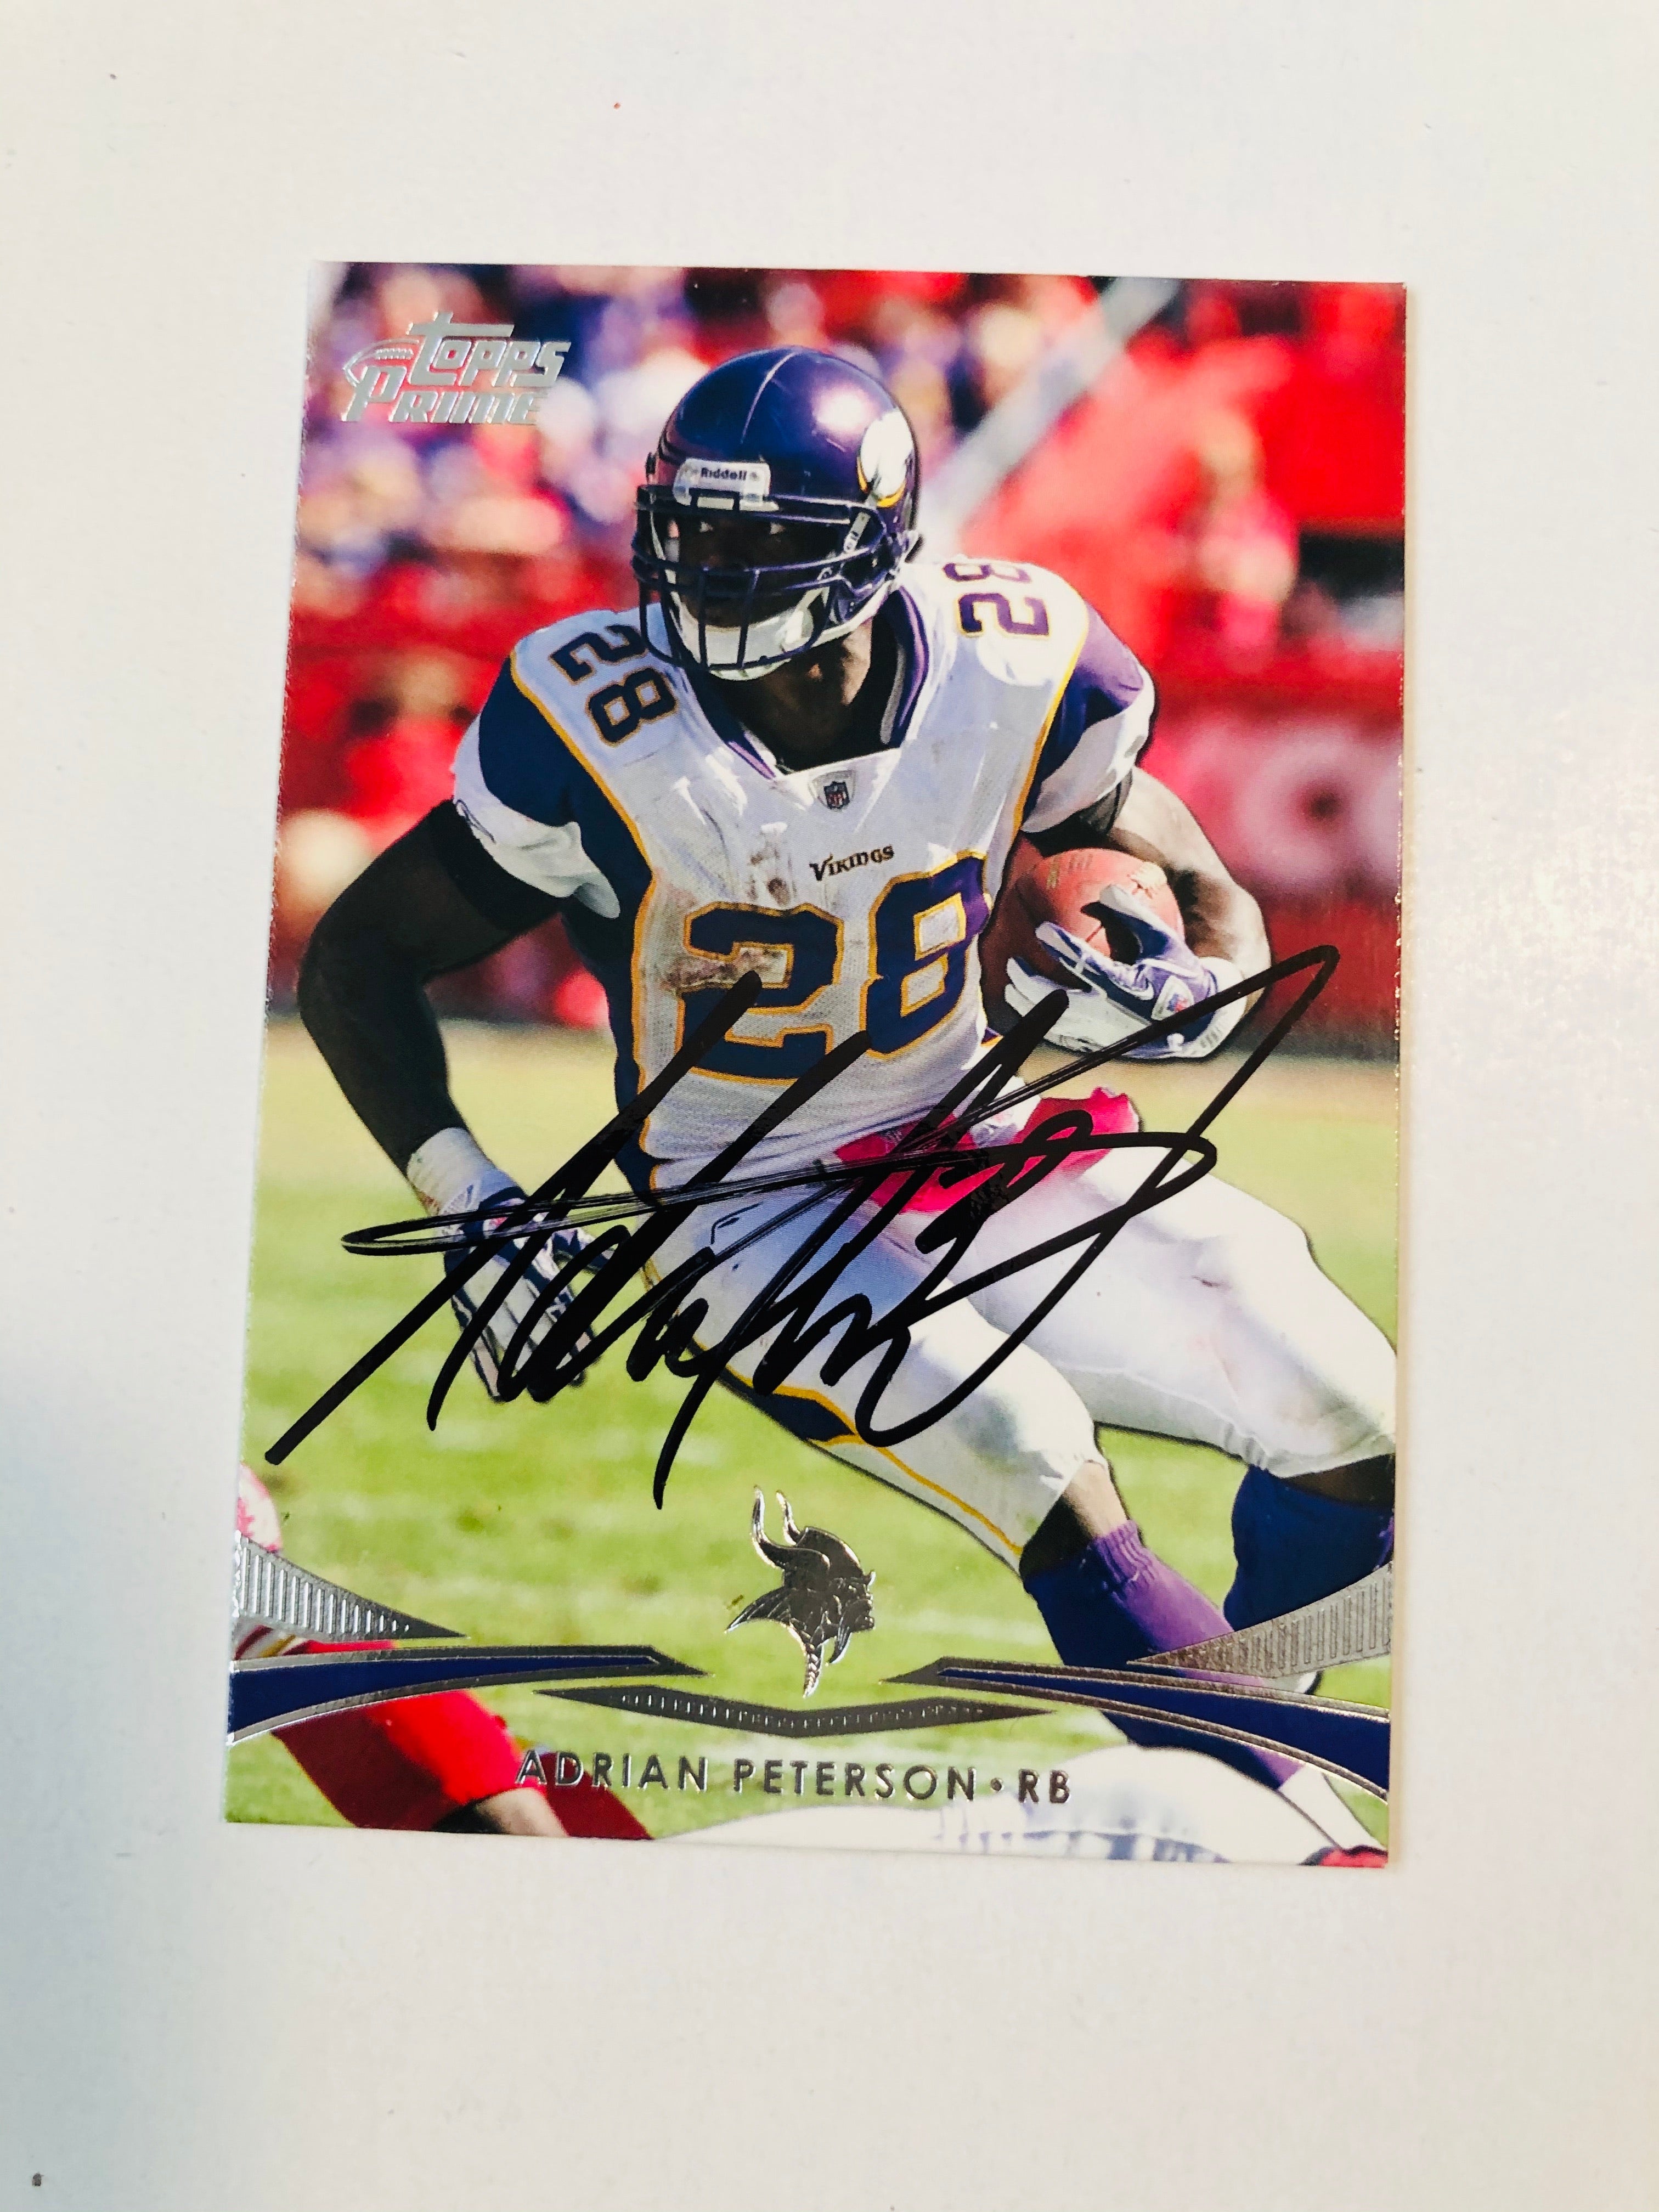 Adrian Peterson rare signed football card with COA